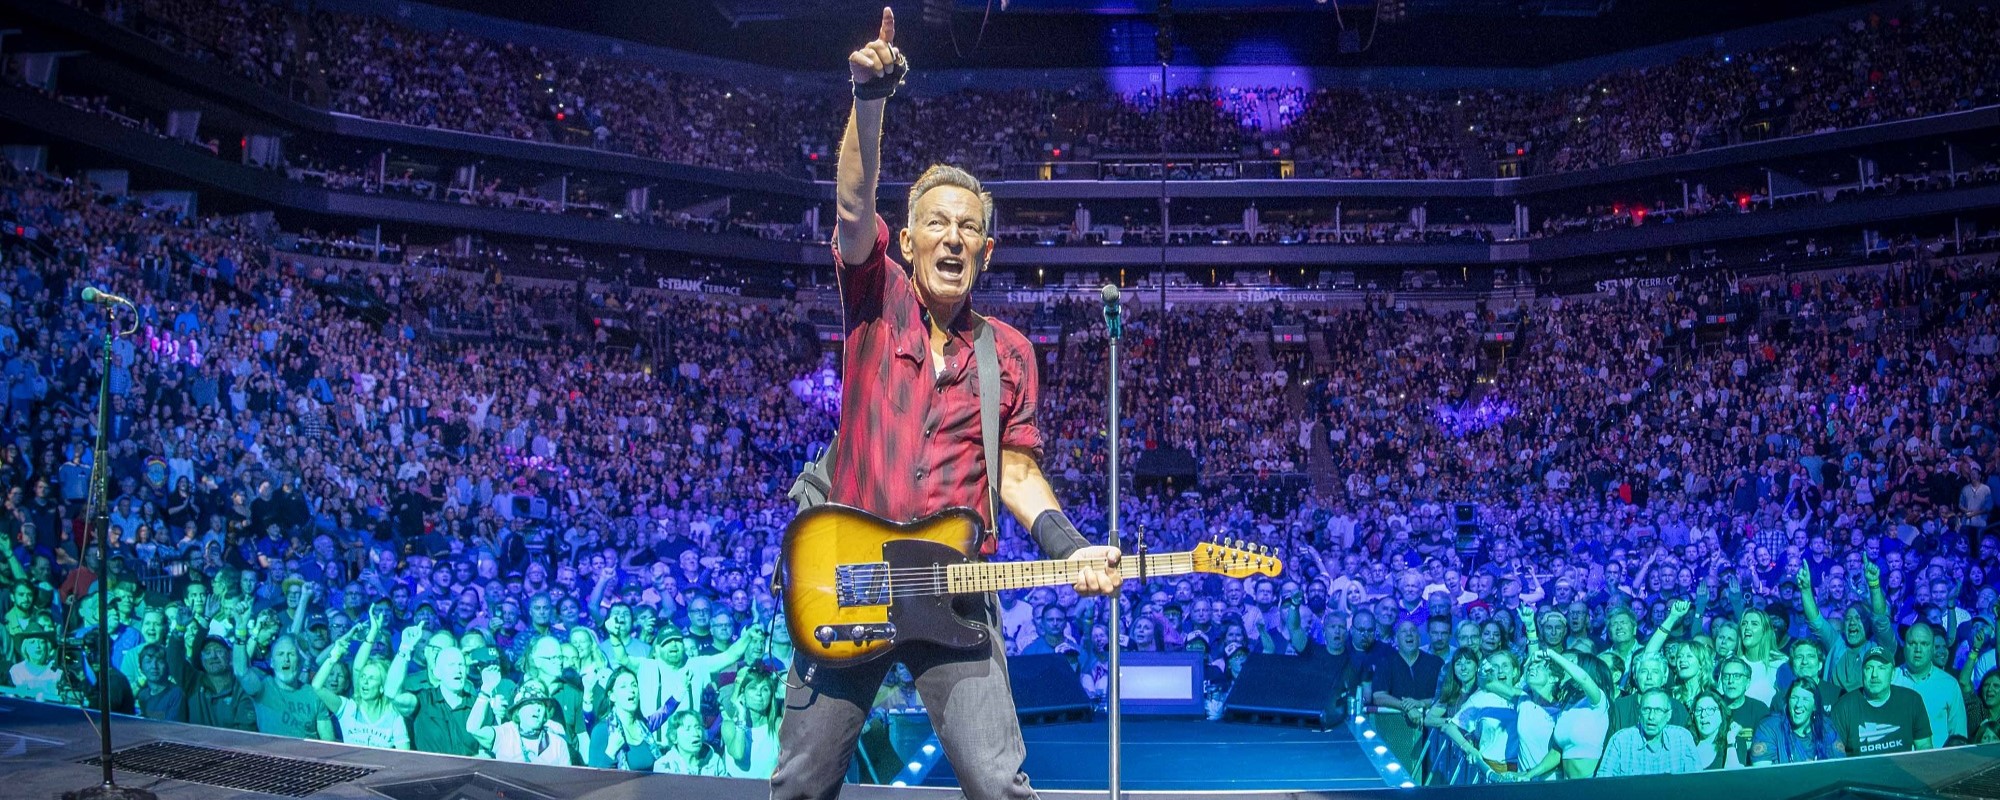 Bruce Springsteen Pays Tribute to Shane MacGowan, Jumps Into Ireland Crowd for E Street Band Performance